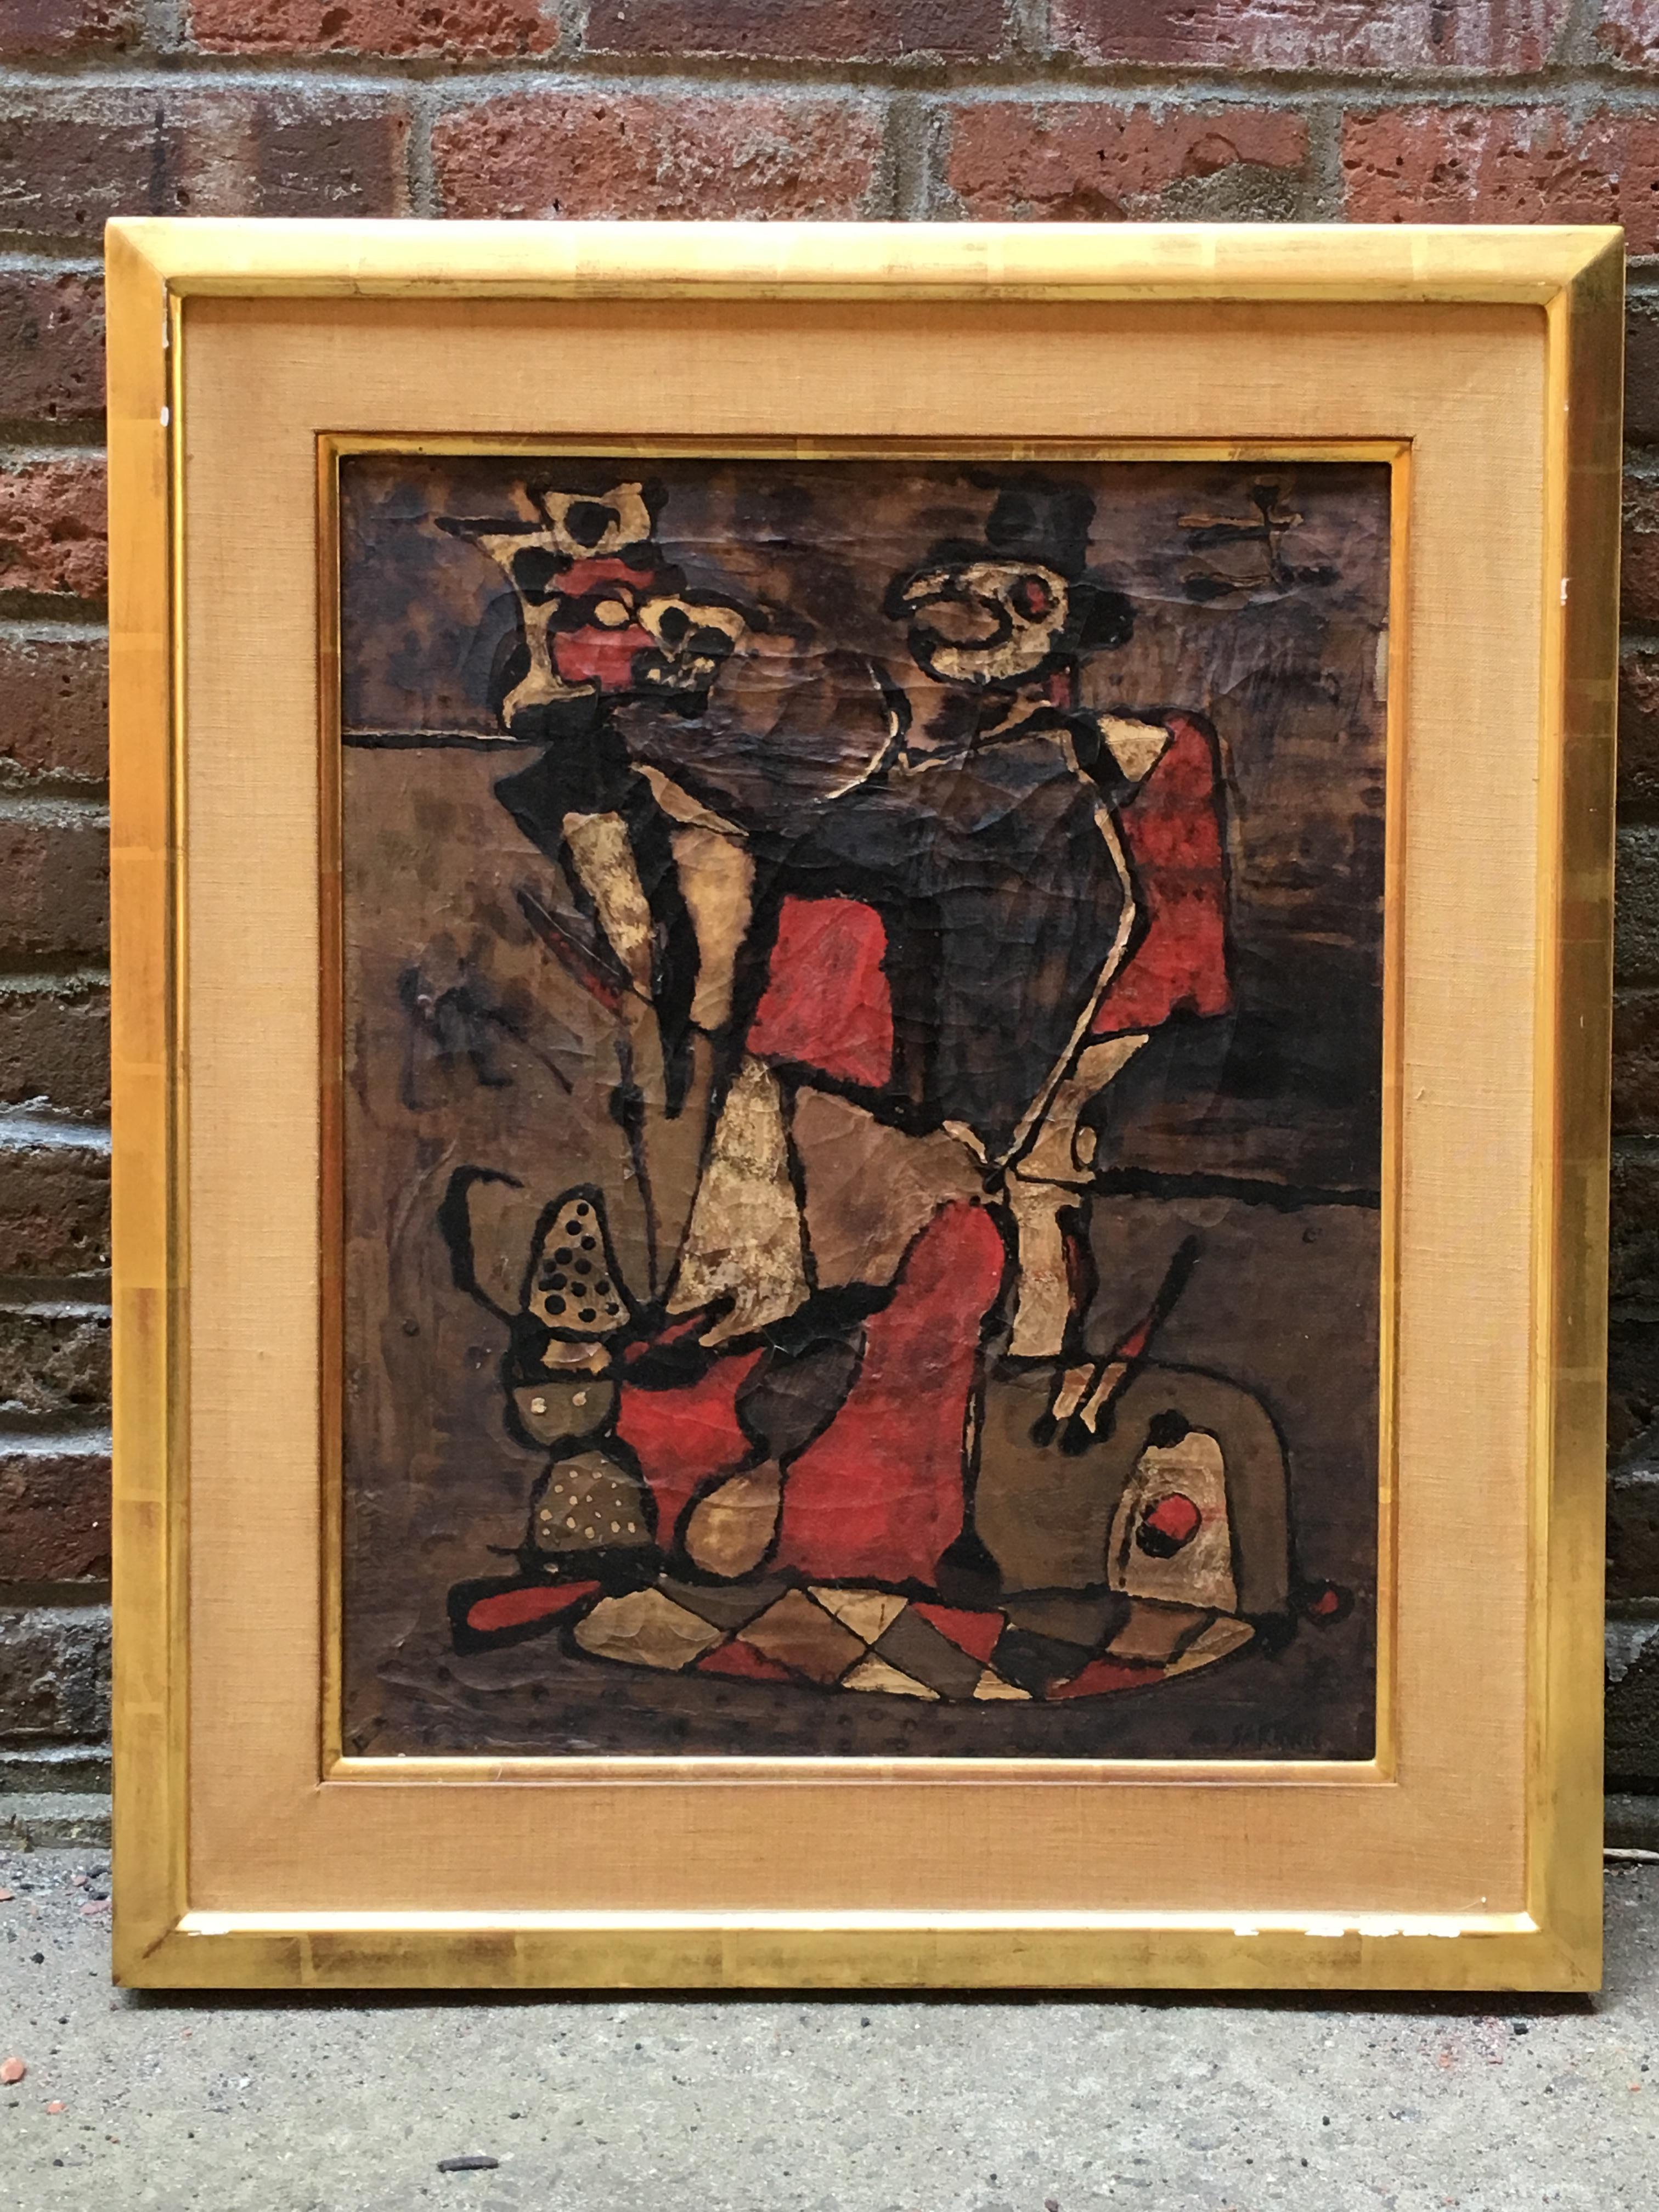 Signed Sartoris lower right. Alberto Sartoris, Italy (1901-?). Oil paint and mixed media on canvas. Circa 1950. Sartoris has rendered two grotesque figures that appear to be in harlequin costumes. A tumultuous subject matter.

Overall dimensions